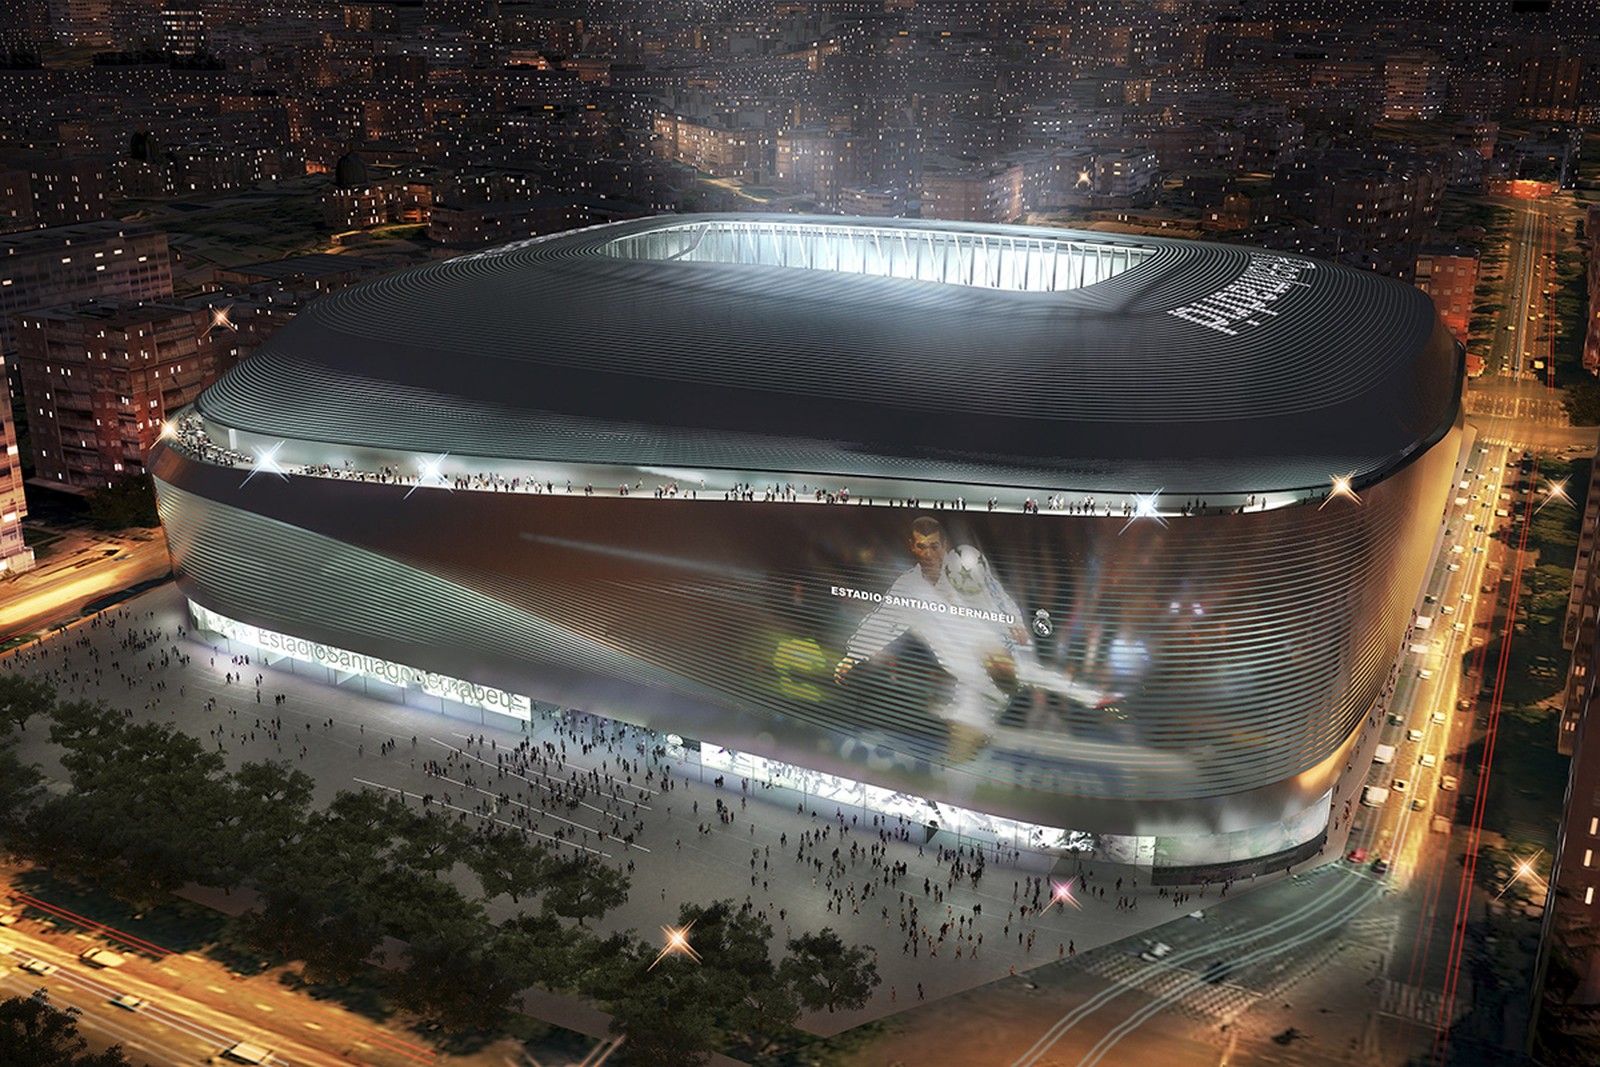 Santiago Bernabeu of the Future will have a new casino